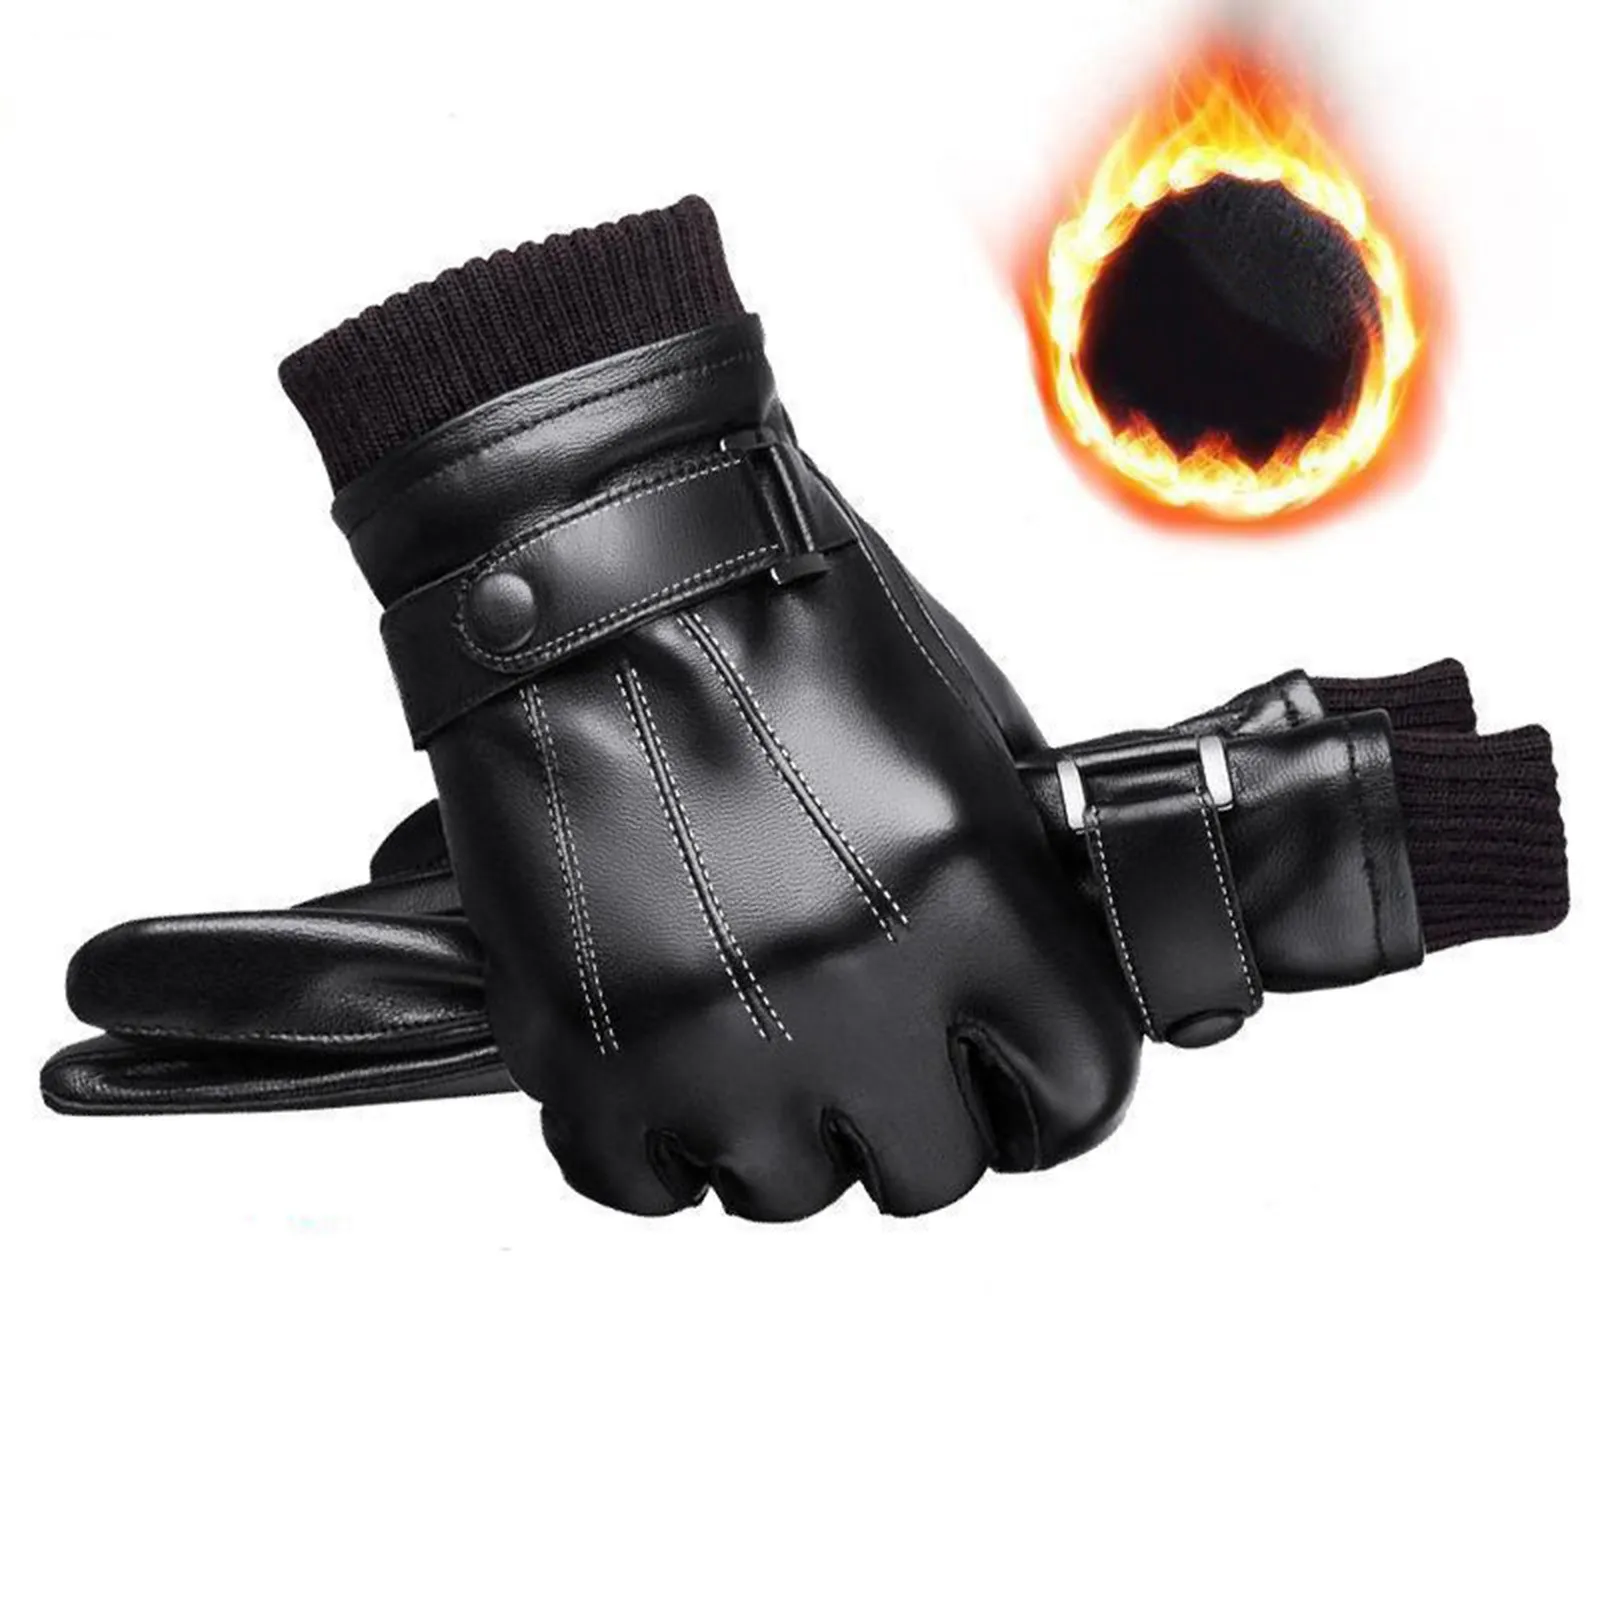 

Men's Gloves Black Pu Leather Gloves Winter Mittens Keep Warm Touch Screen Windproof Driving Guantes Male Autumn Winter Business